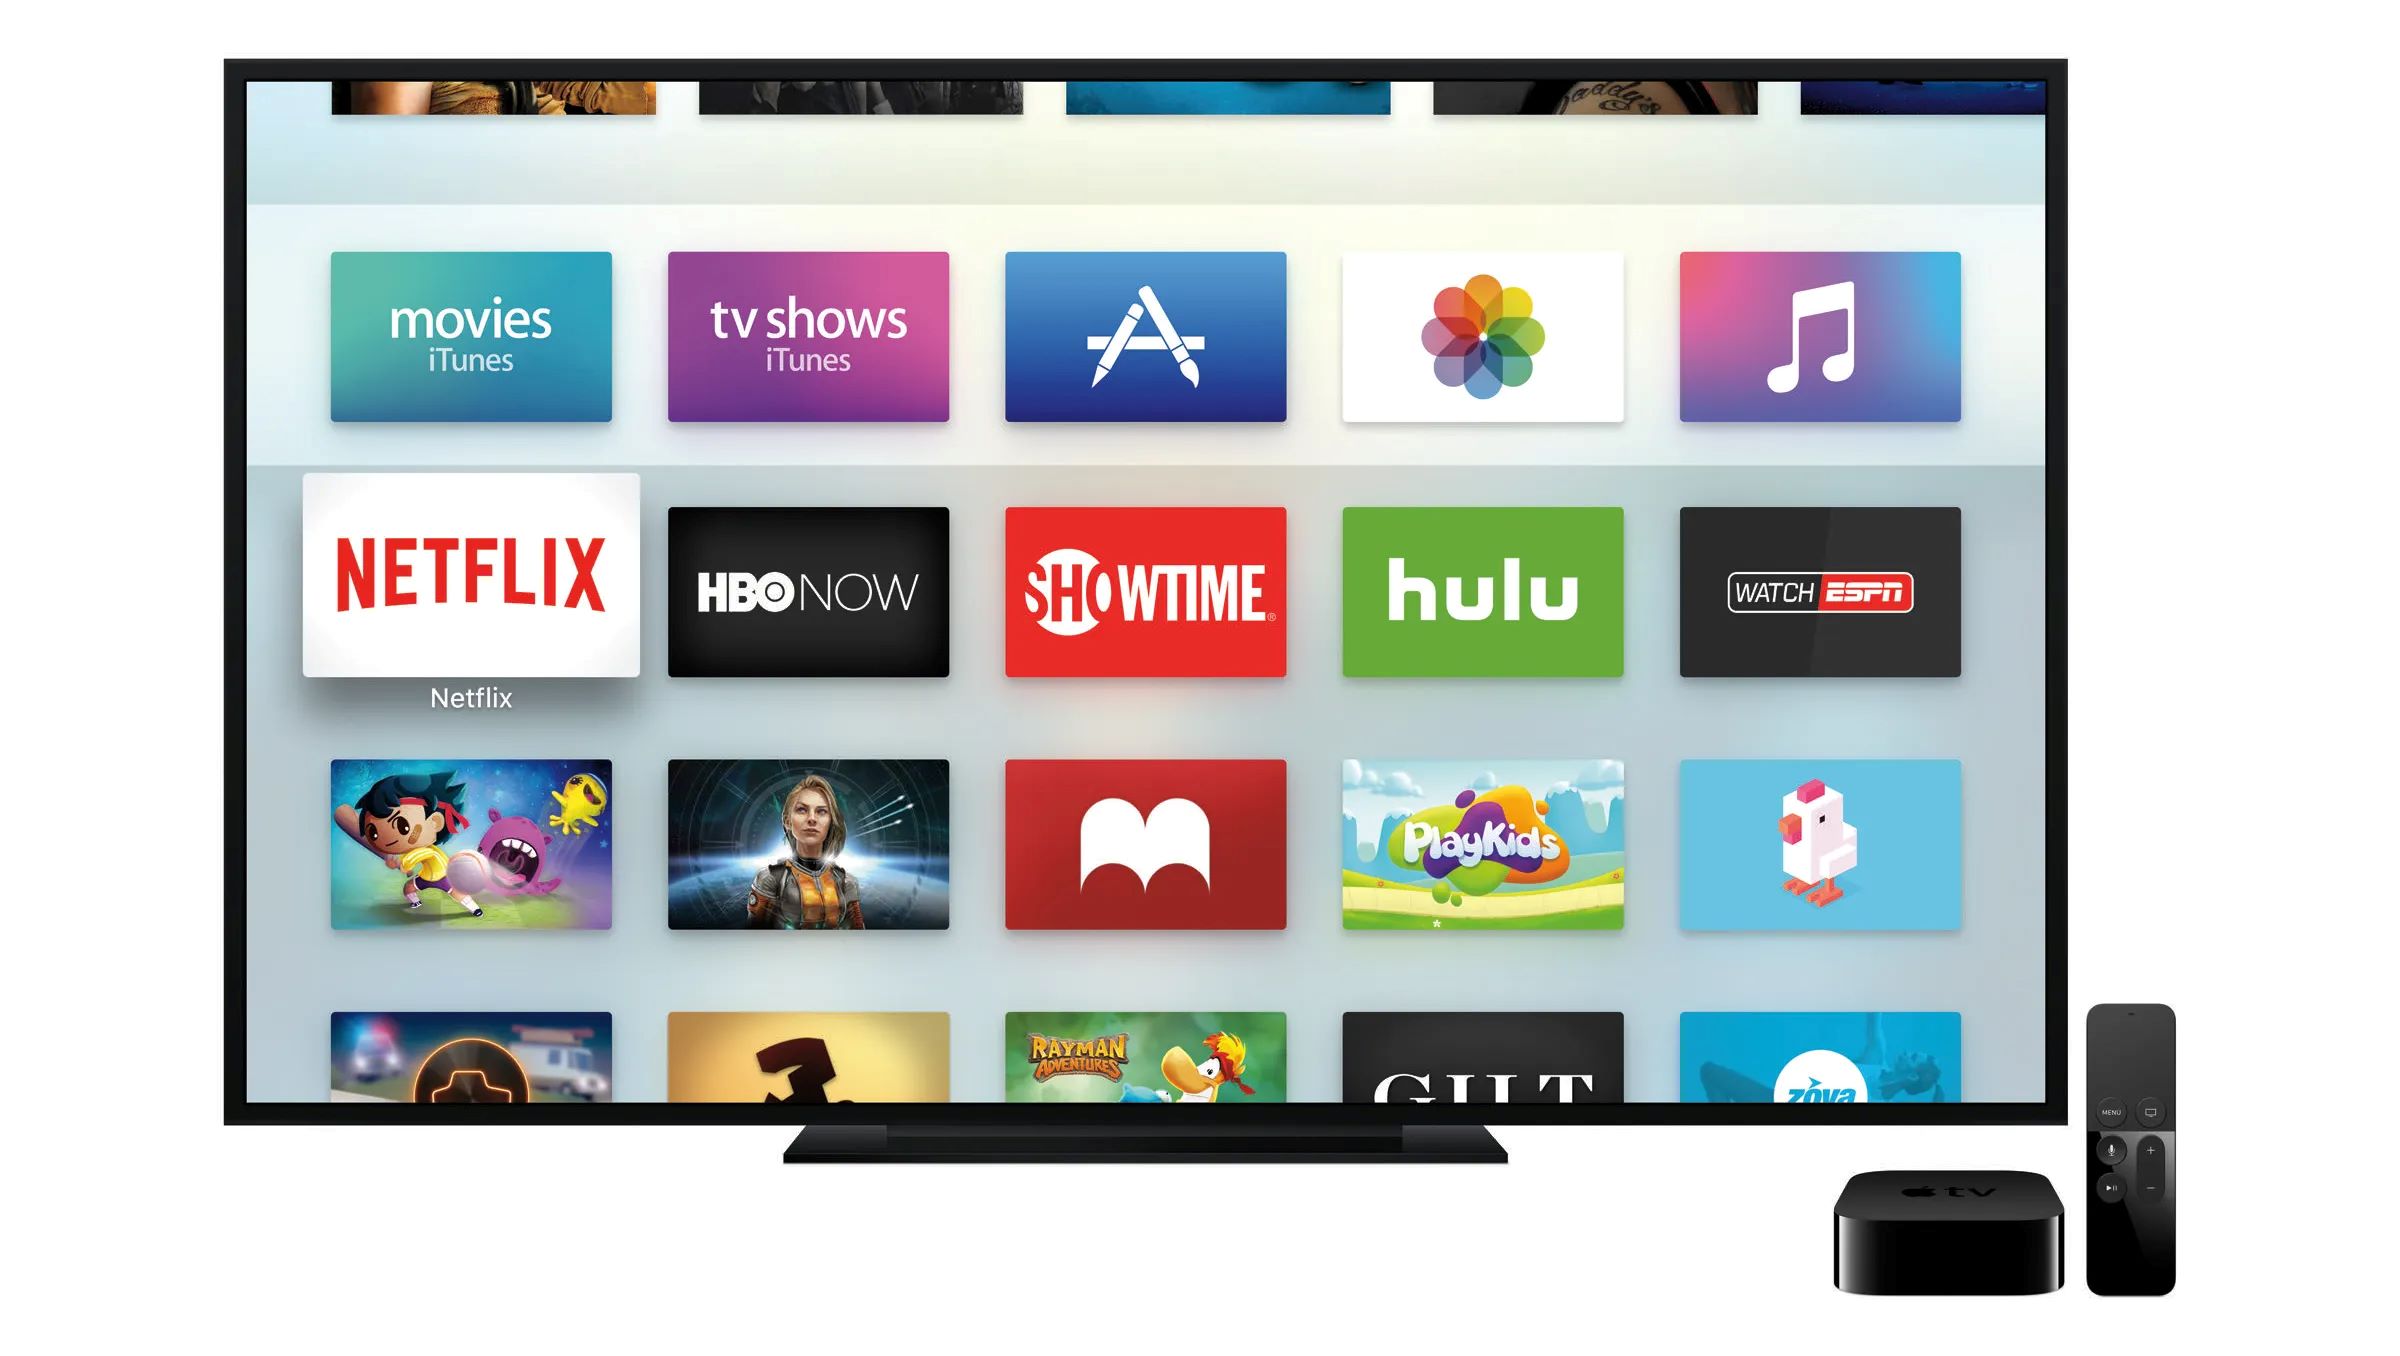 How To Get To App Store On Apple TV